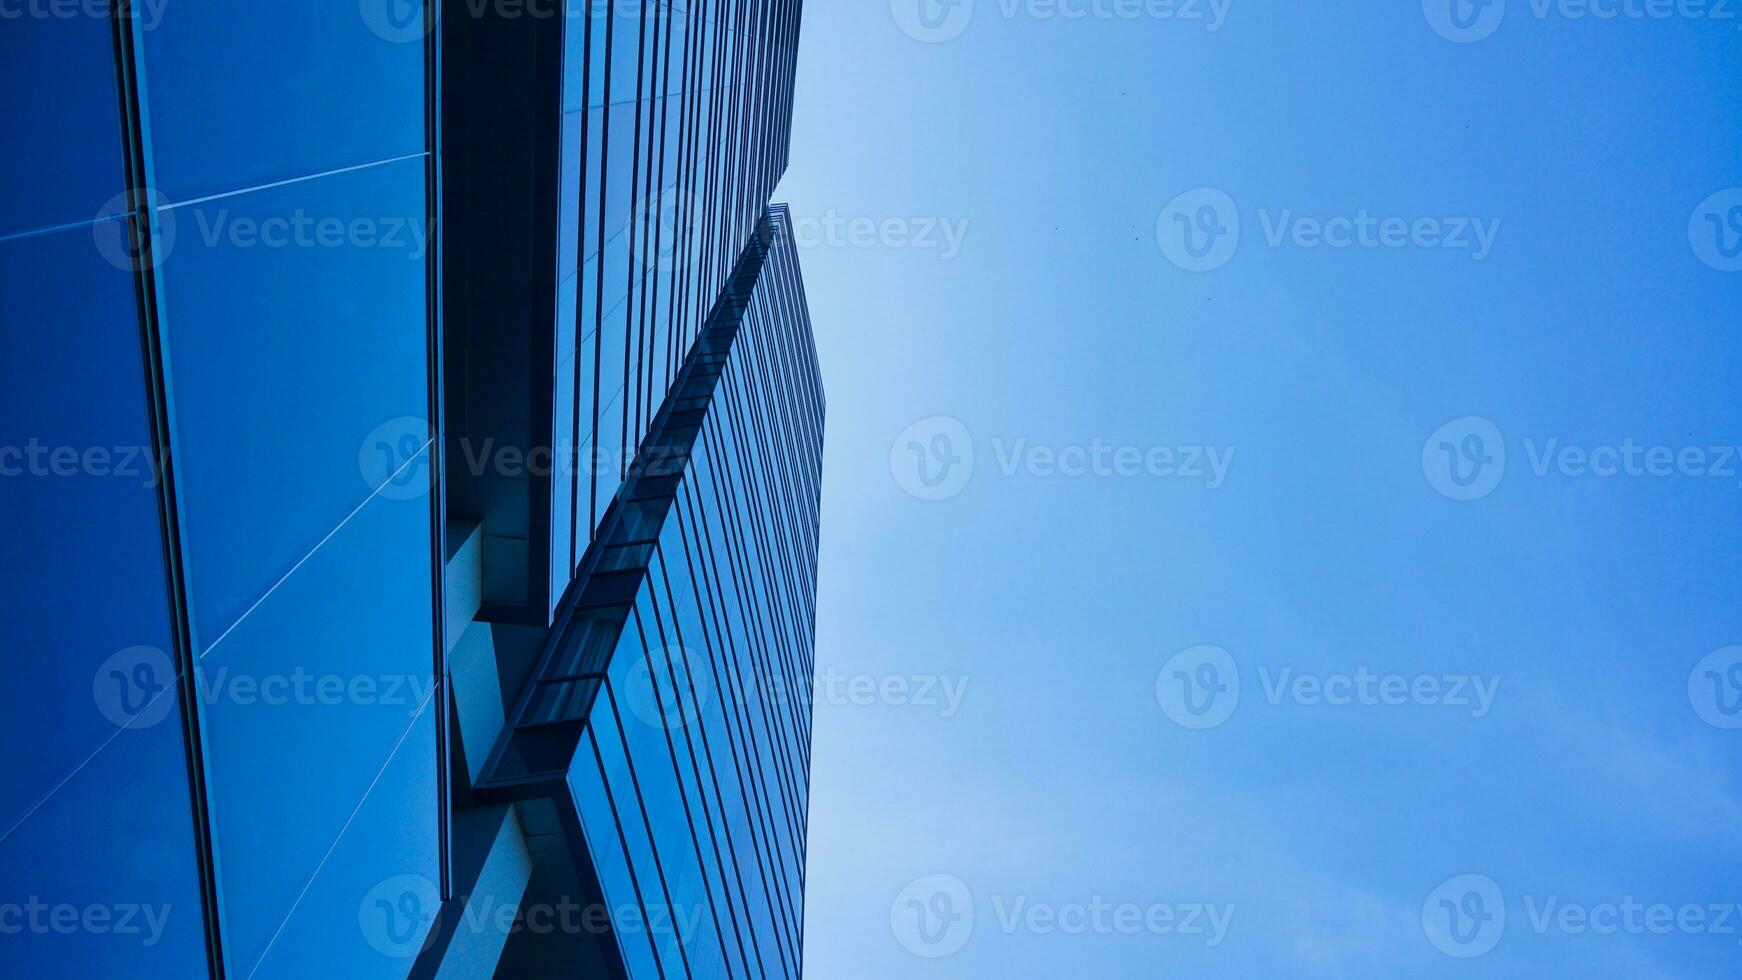 bottom view blue glasses building with sky and cloud background. Skyscraper, view of modern business building. mockup modern blue glasses building landscape. looking up perspective. Copy space photo